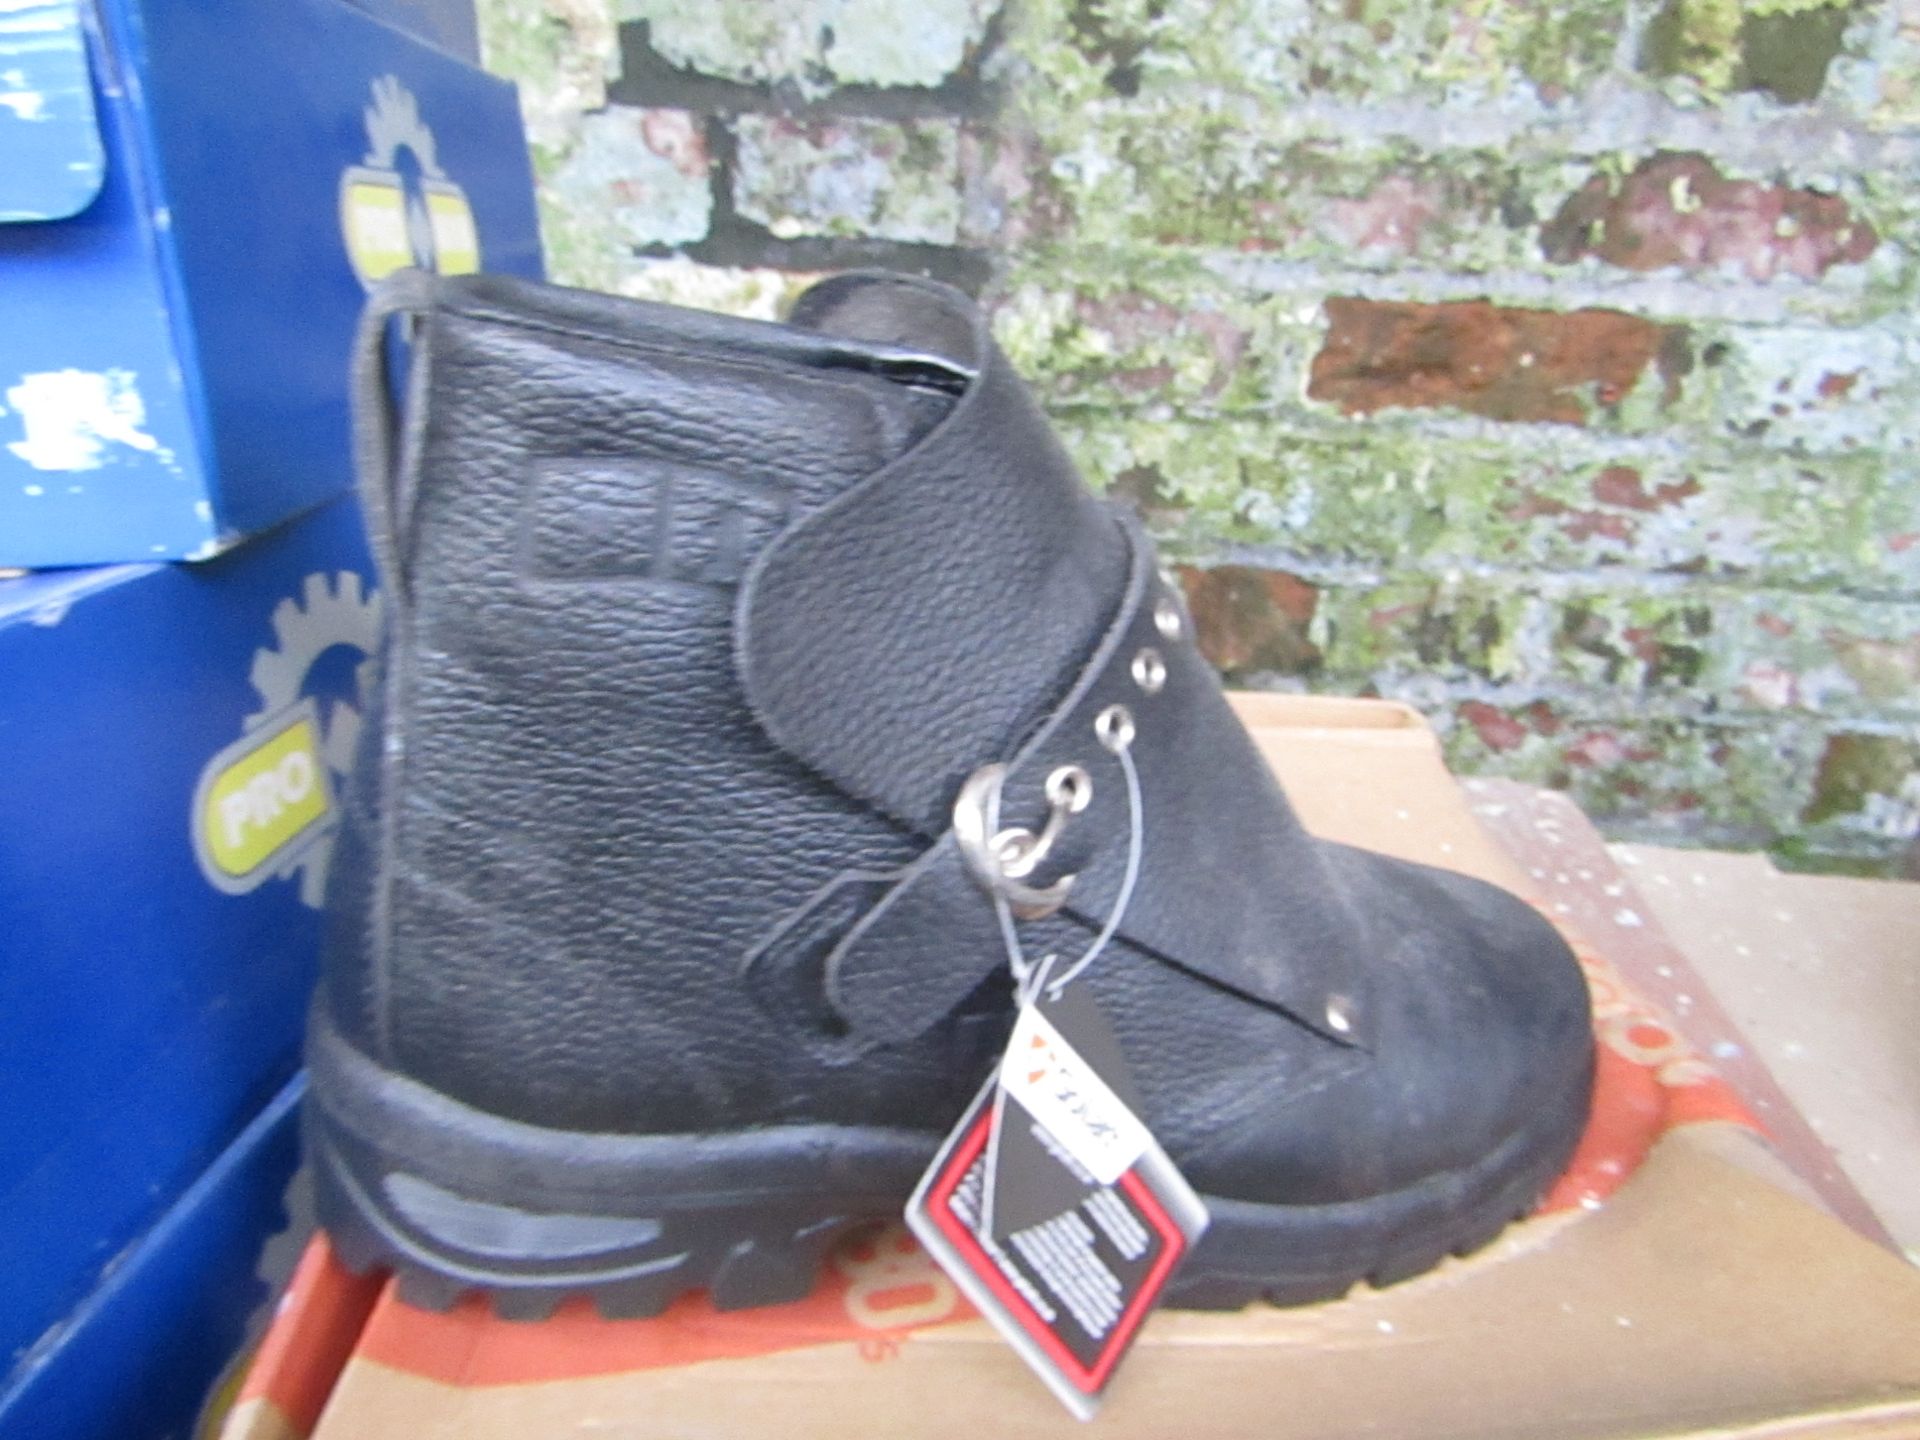 Goliath Ankle height Foundry steel toe cap boot, new size 10